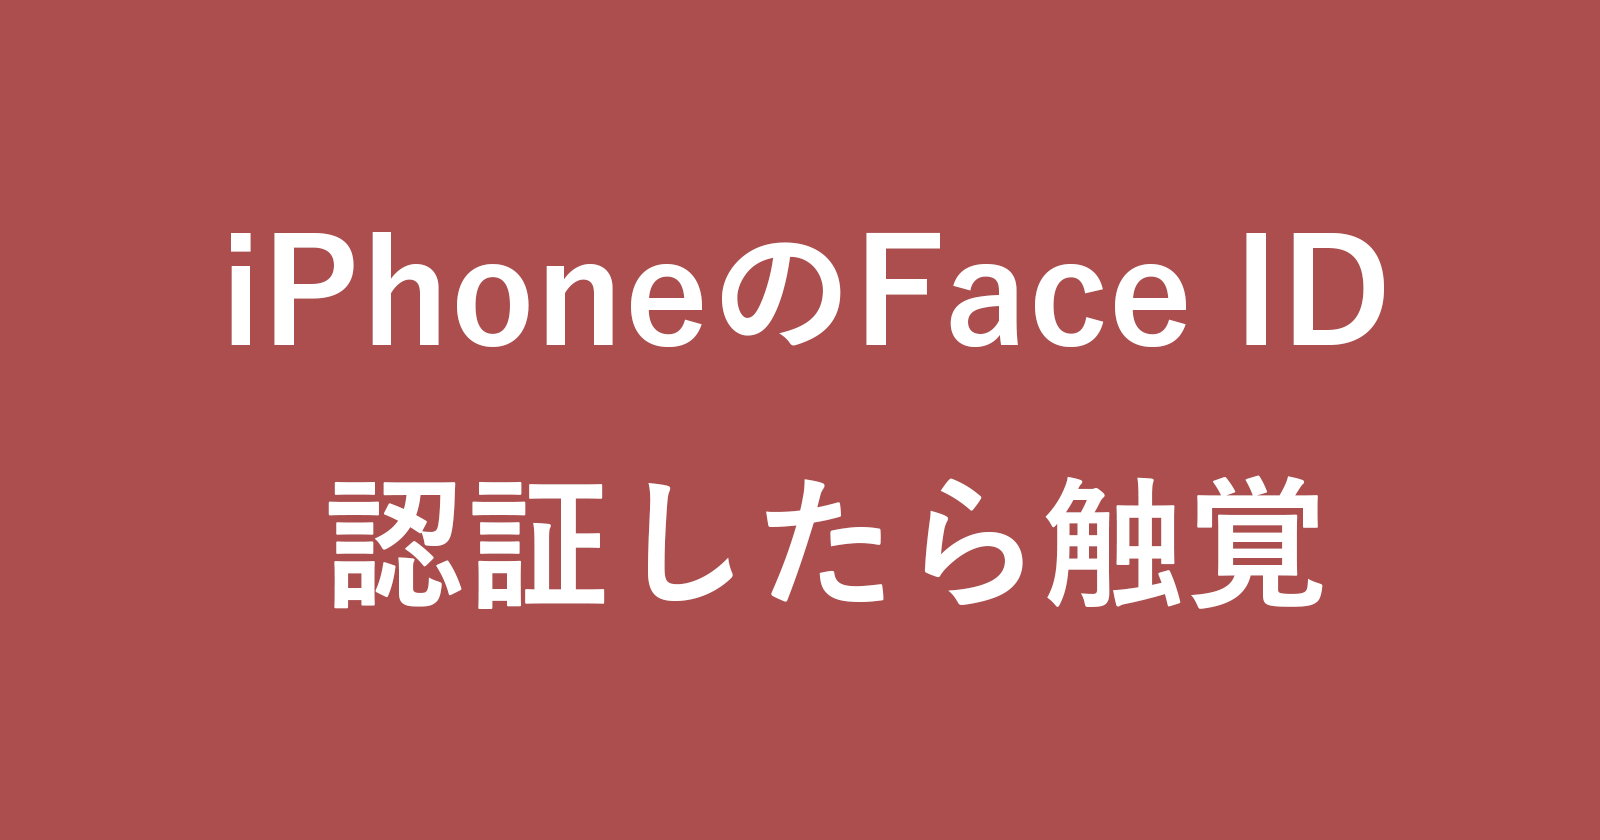 iphone accessibility face id